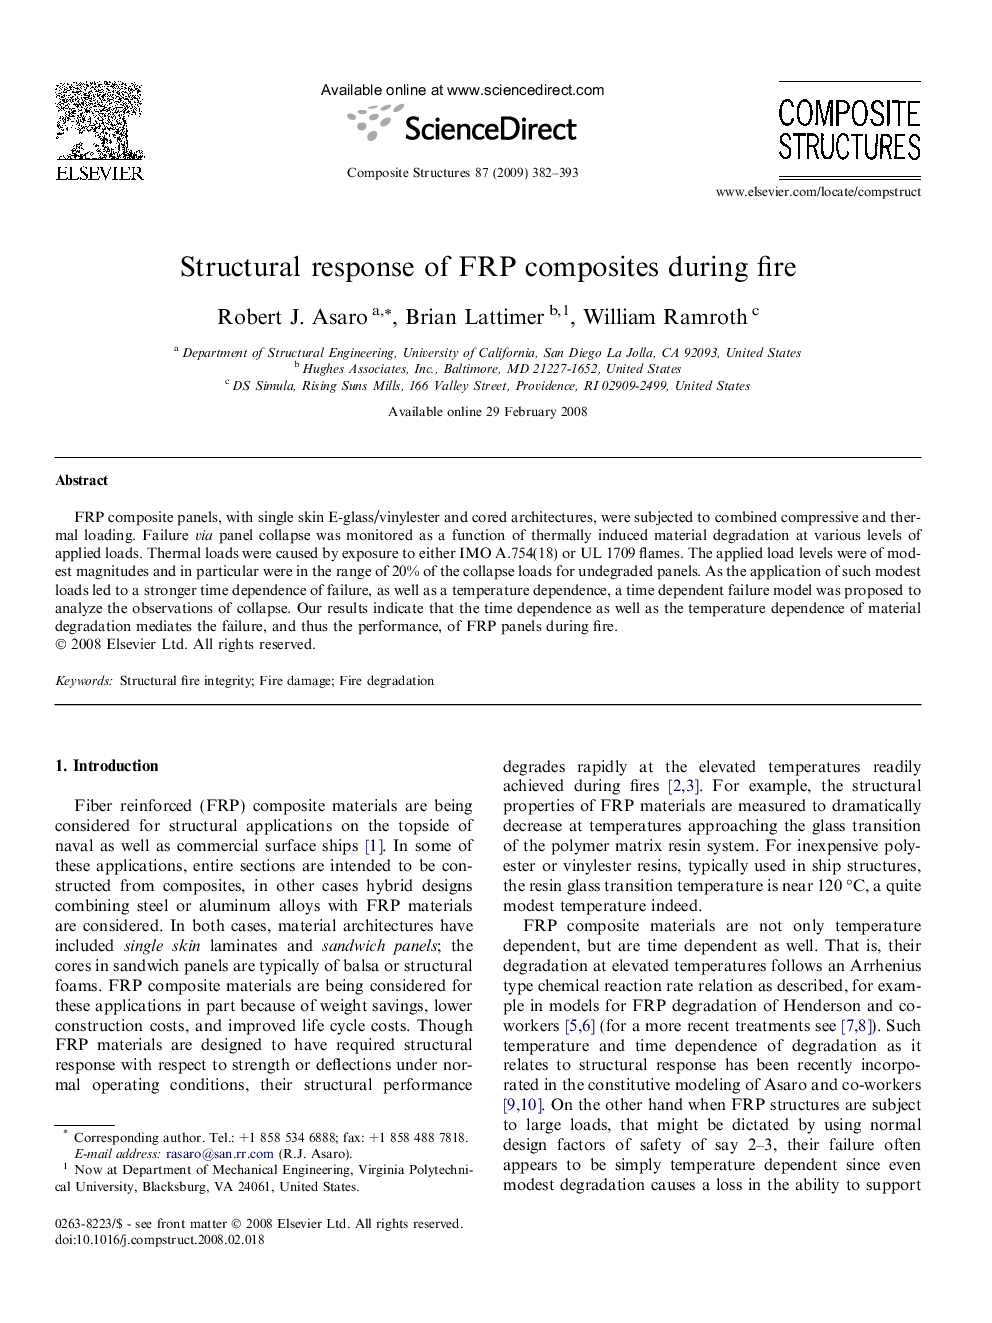 Structural response of FRP composites during fire